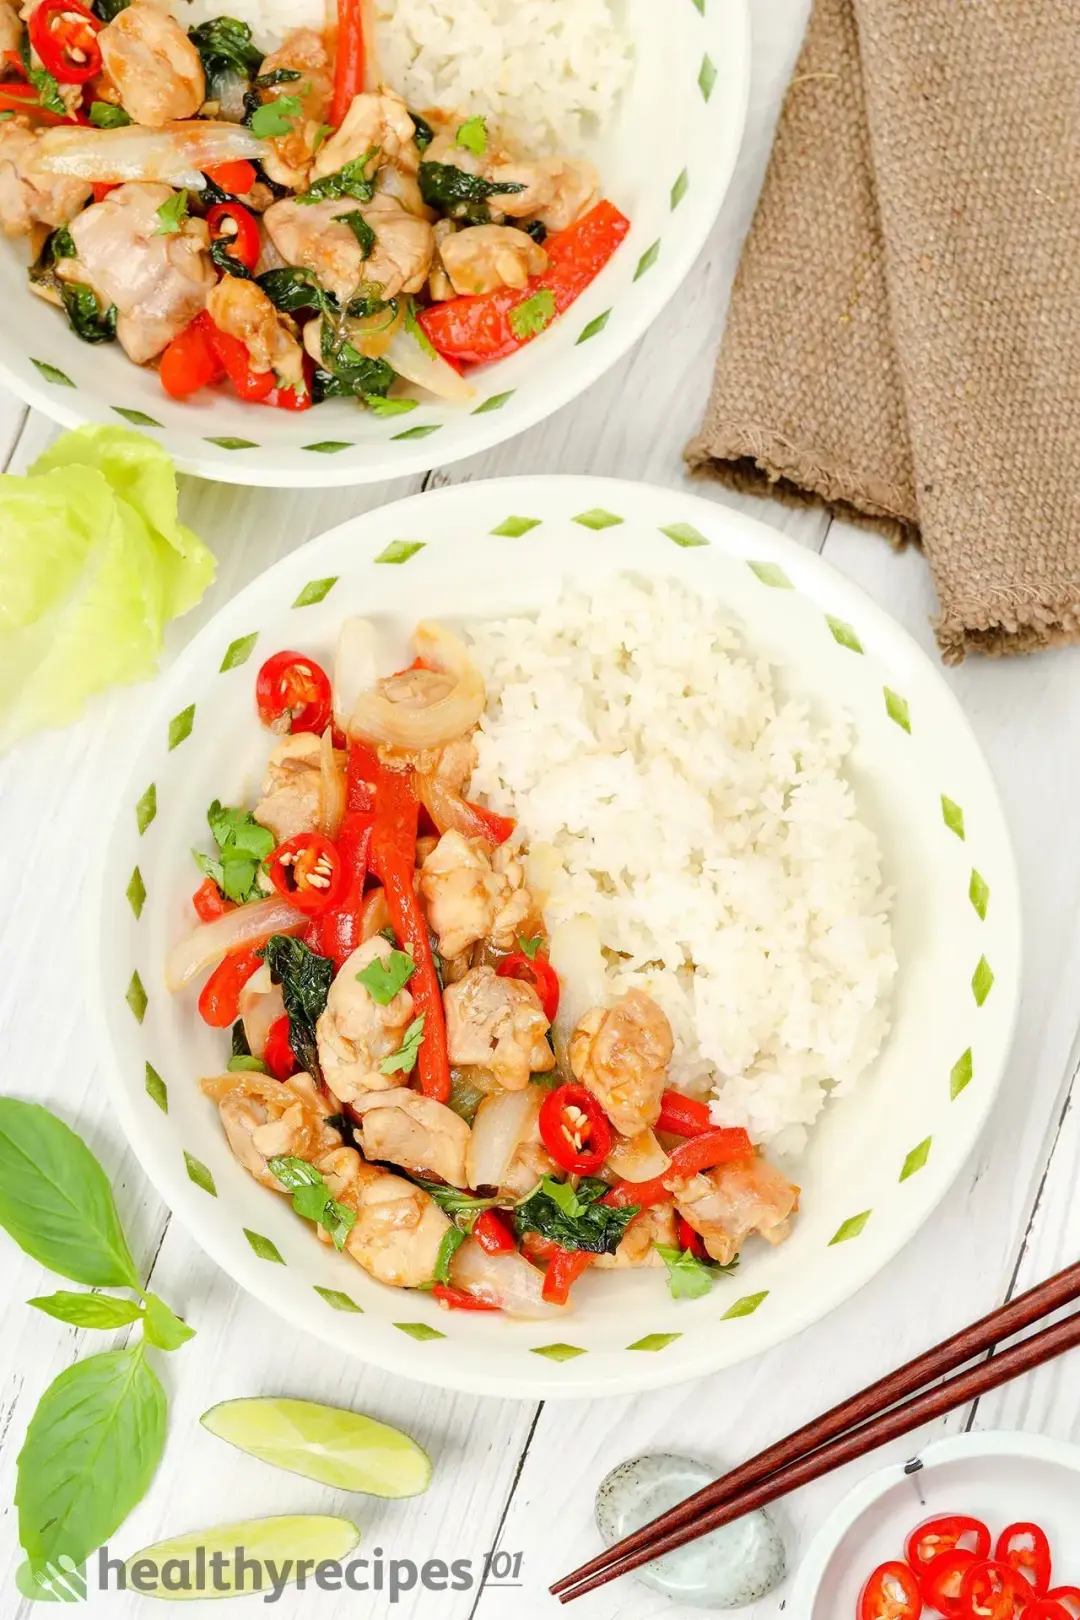 What to Serve With Thai Basil Chicken Recipe